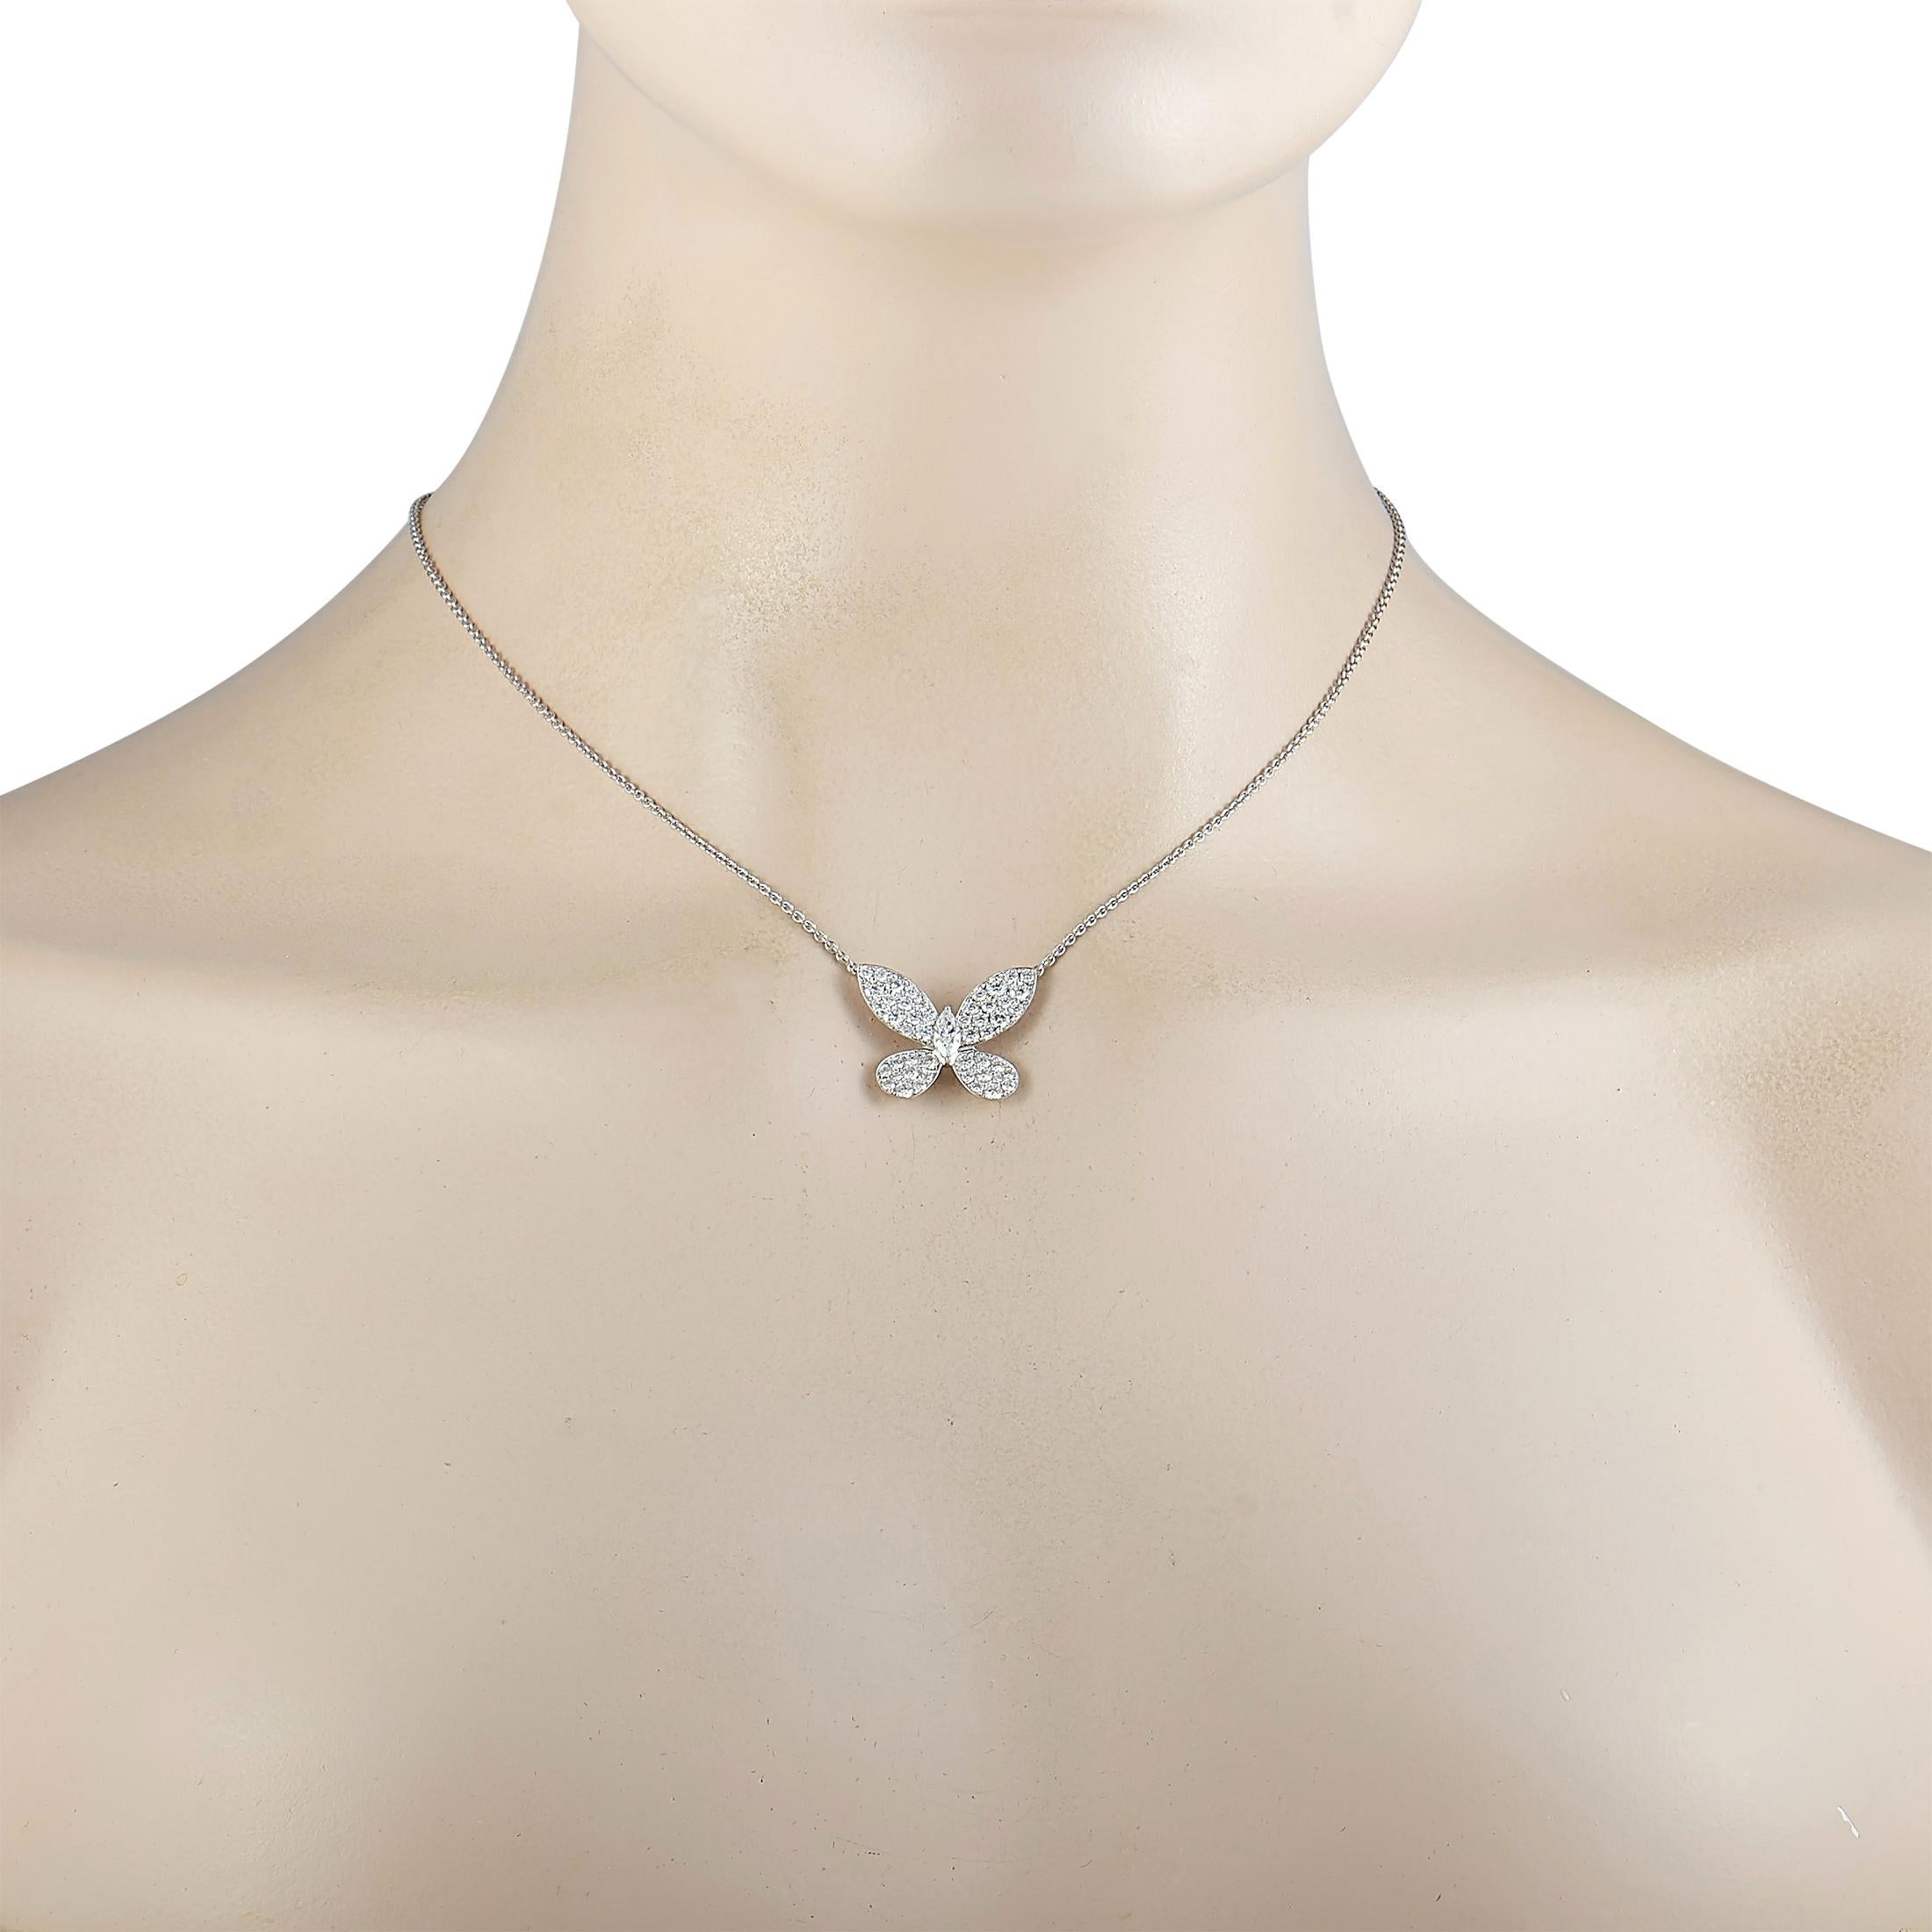 This Graff necklace is made of 18K white gold and presented with a 16” chain onto which a diamond-embellished butterfly pendant is attached, measuring 0.75” in length and 1” in width. The center, marquise diamond stone weighs 0.30 carats and the